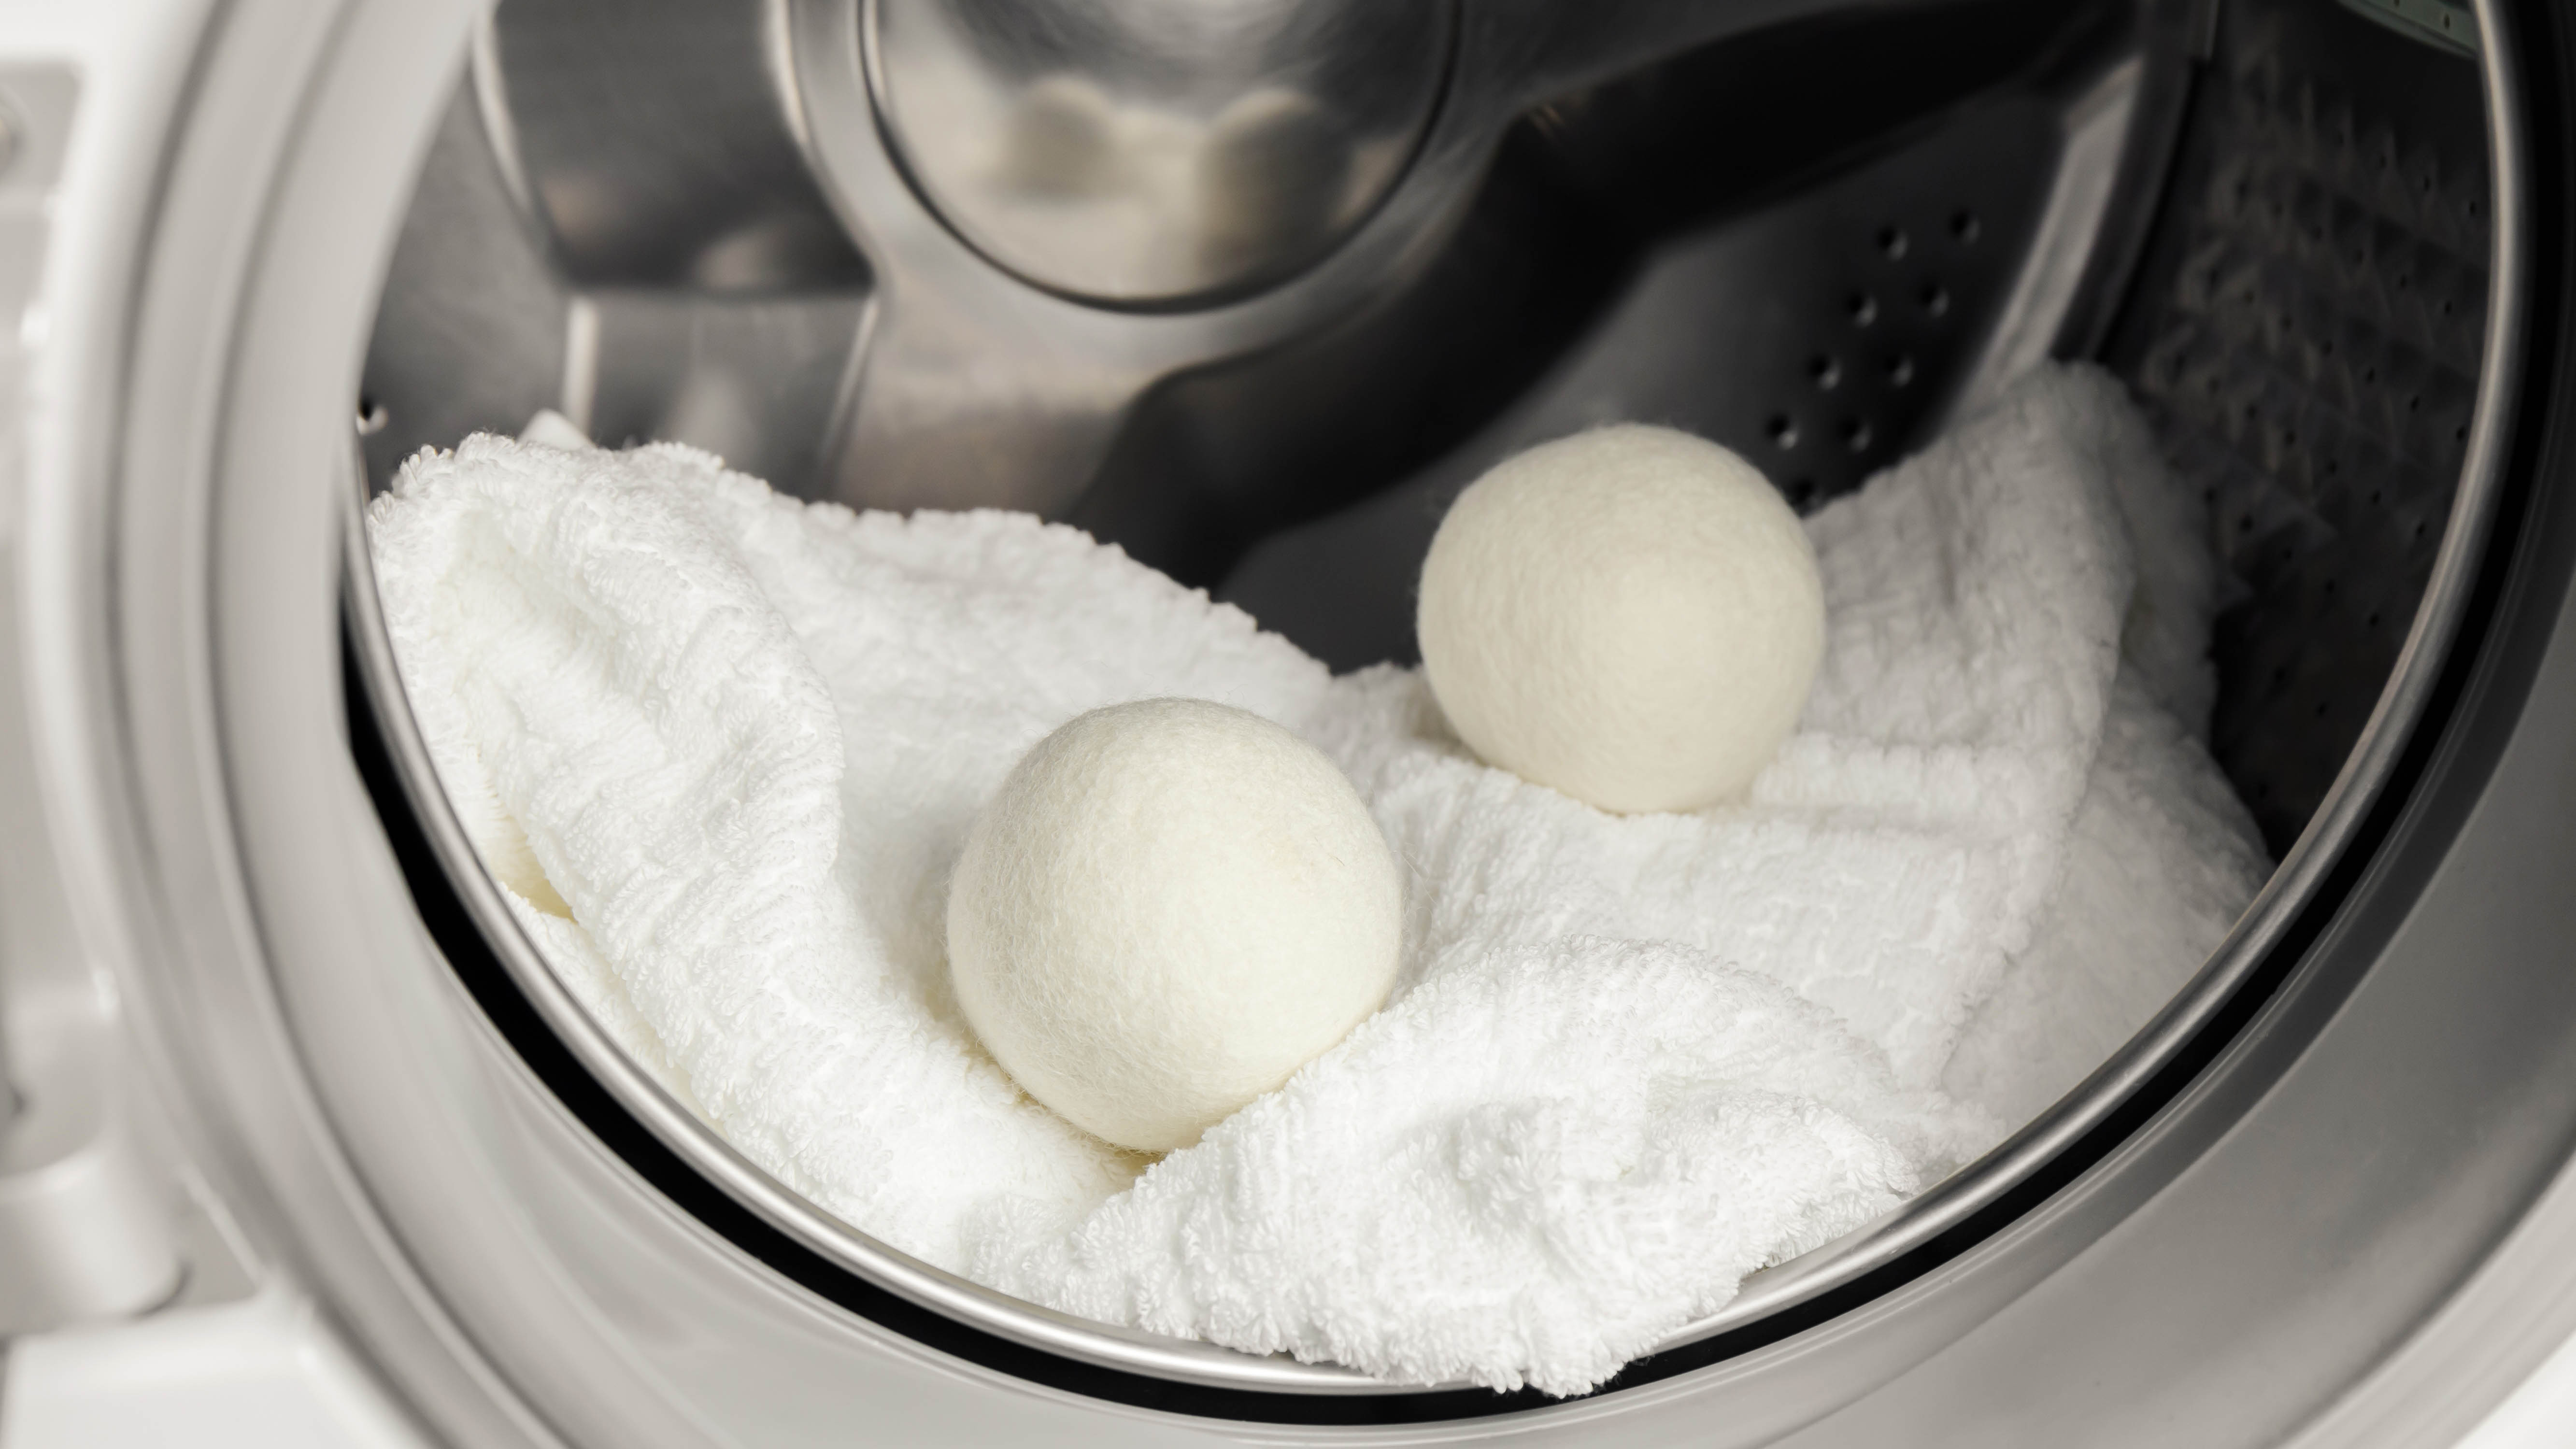 Two wool dryer balls in a clothes dryer on a white towel